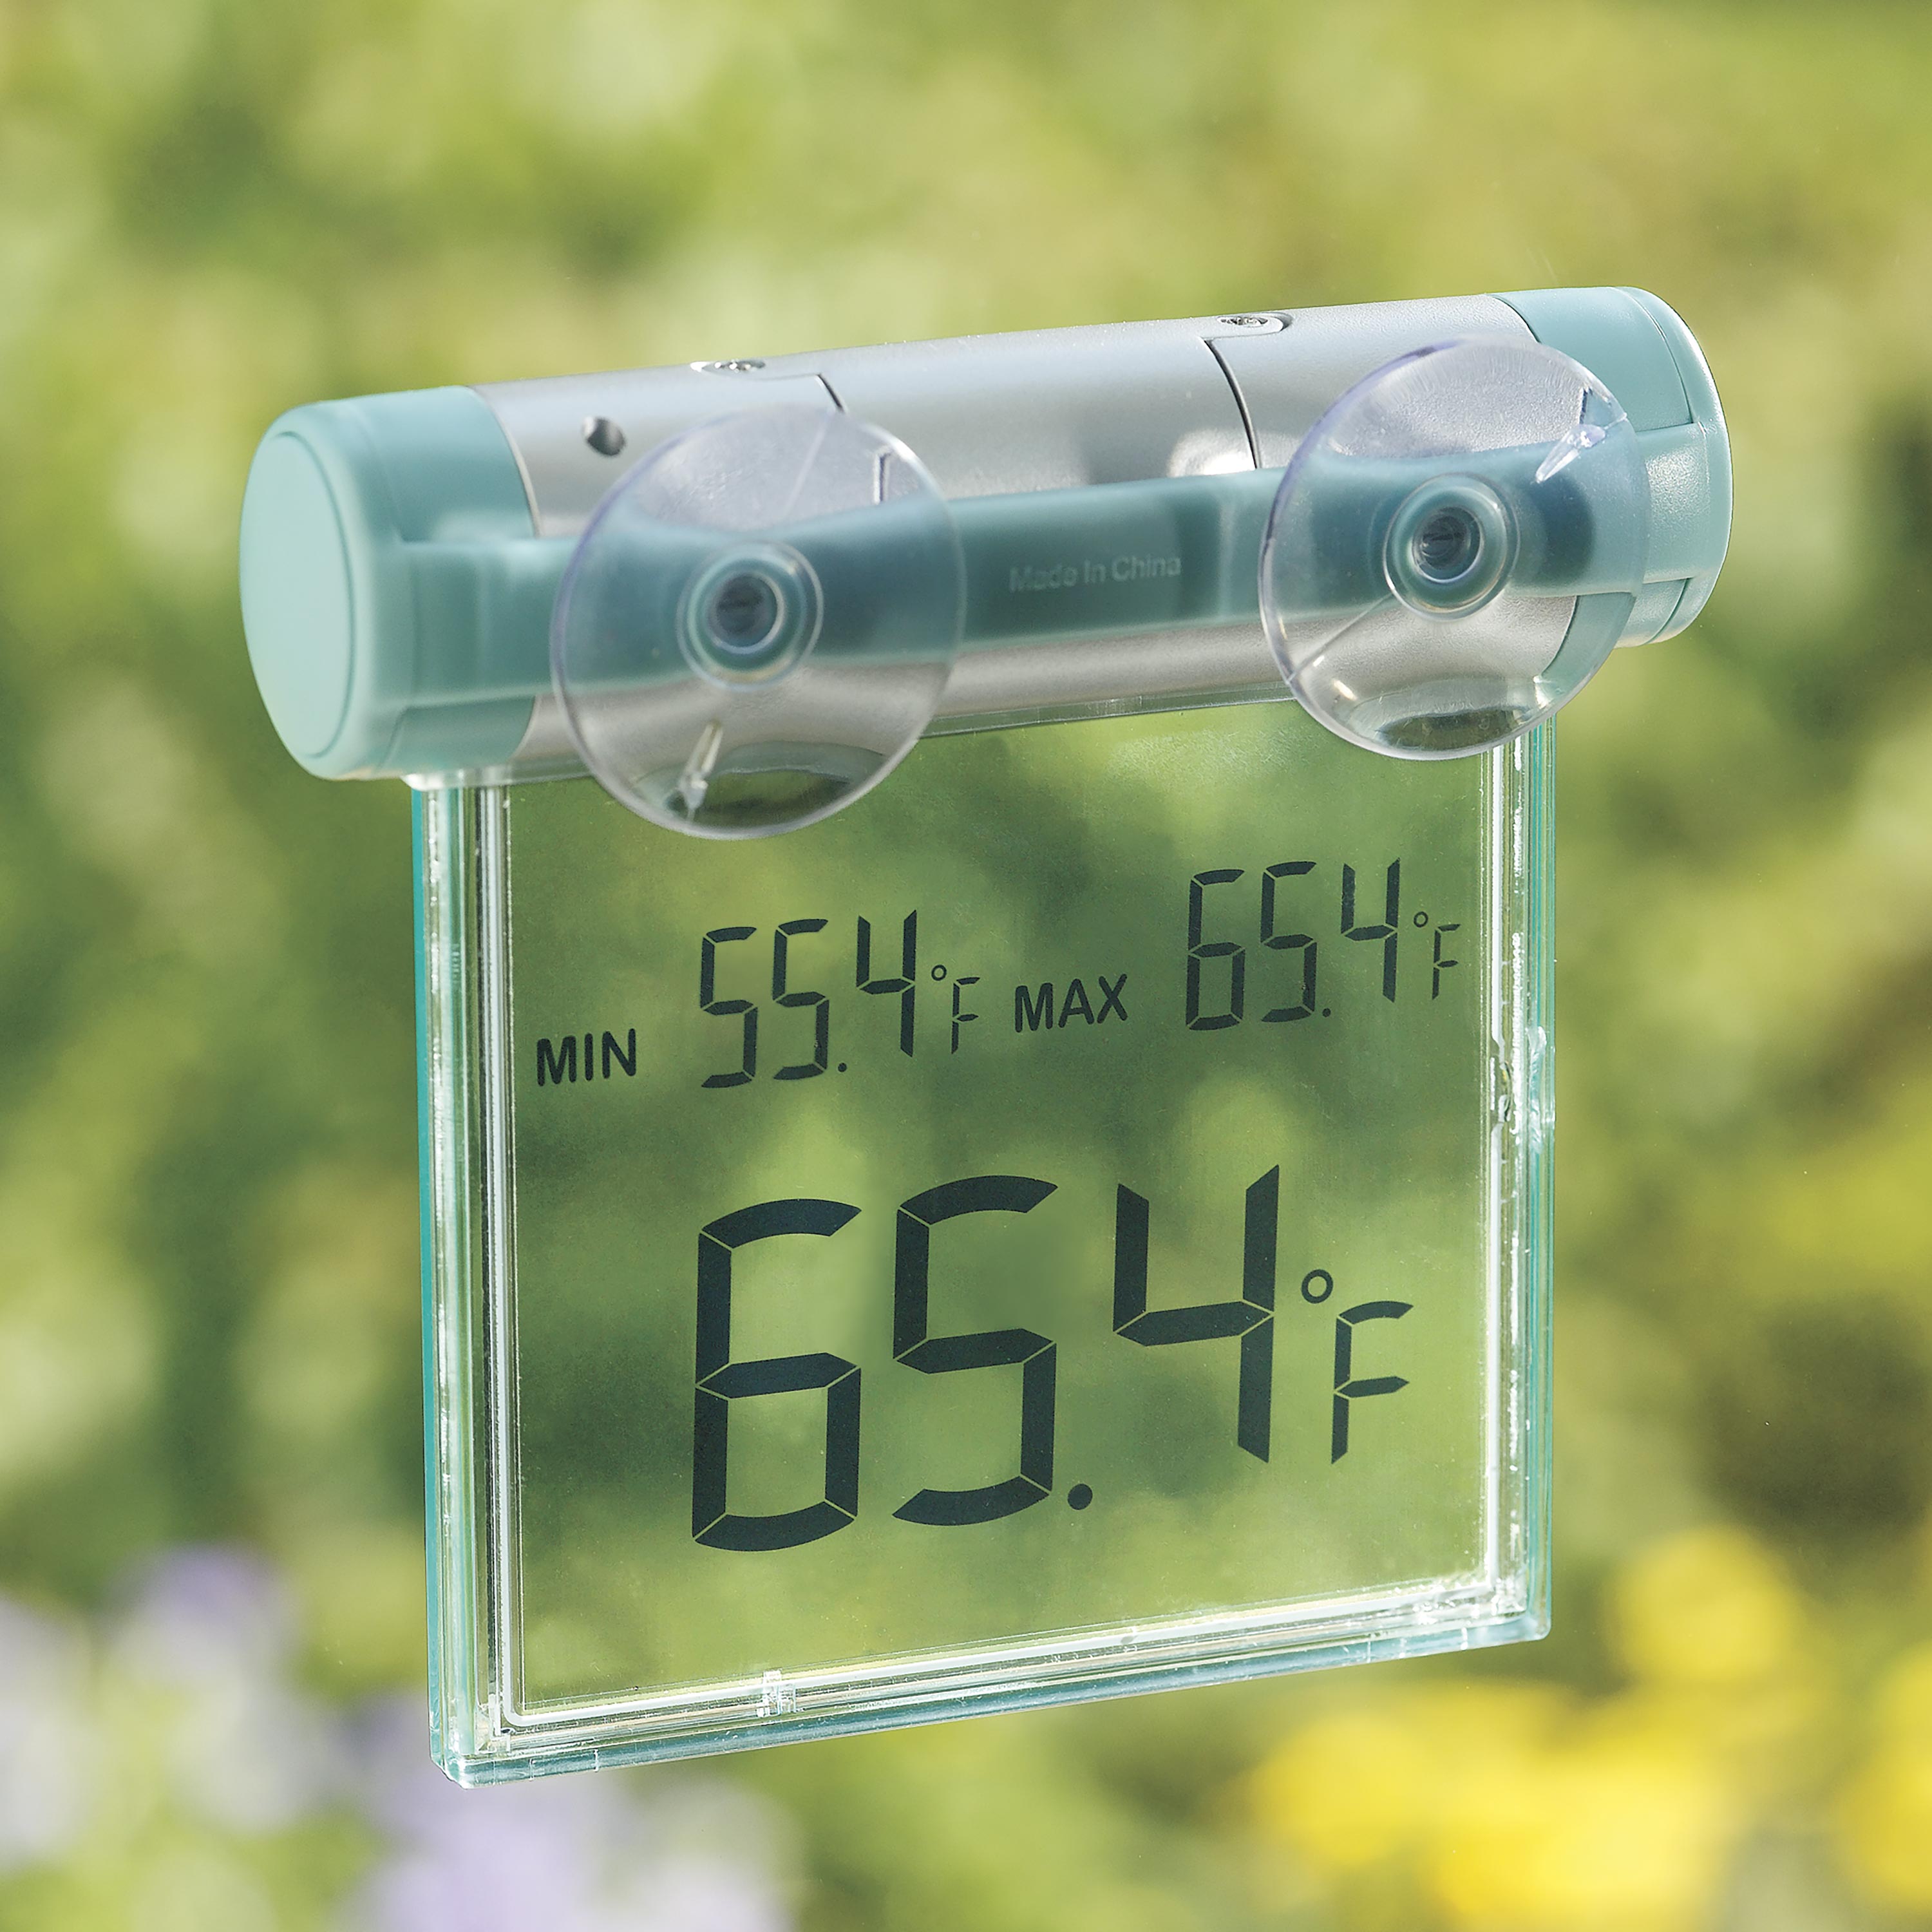 Talking Indoor/Outdoor Thermometer